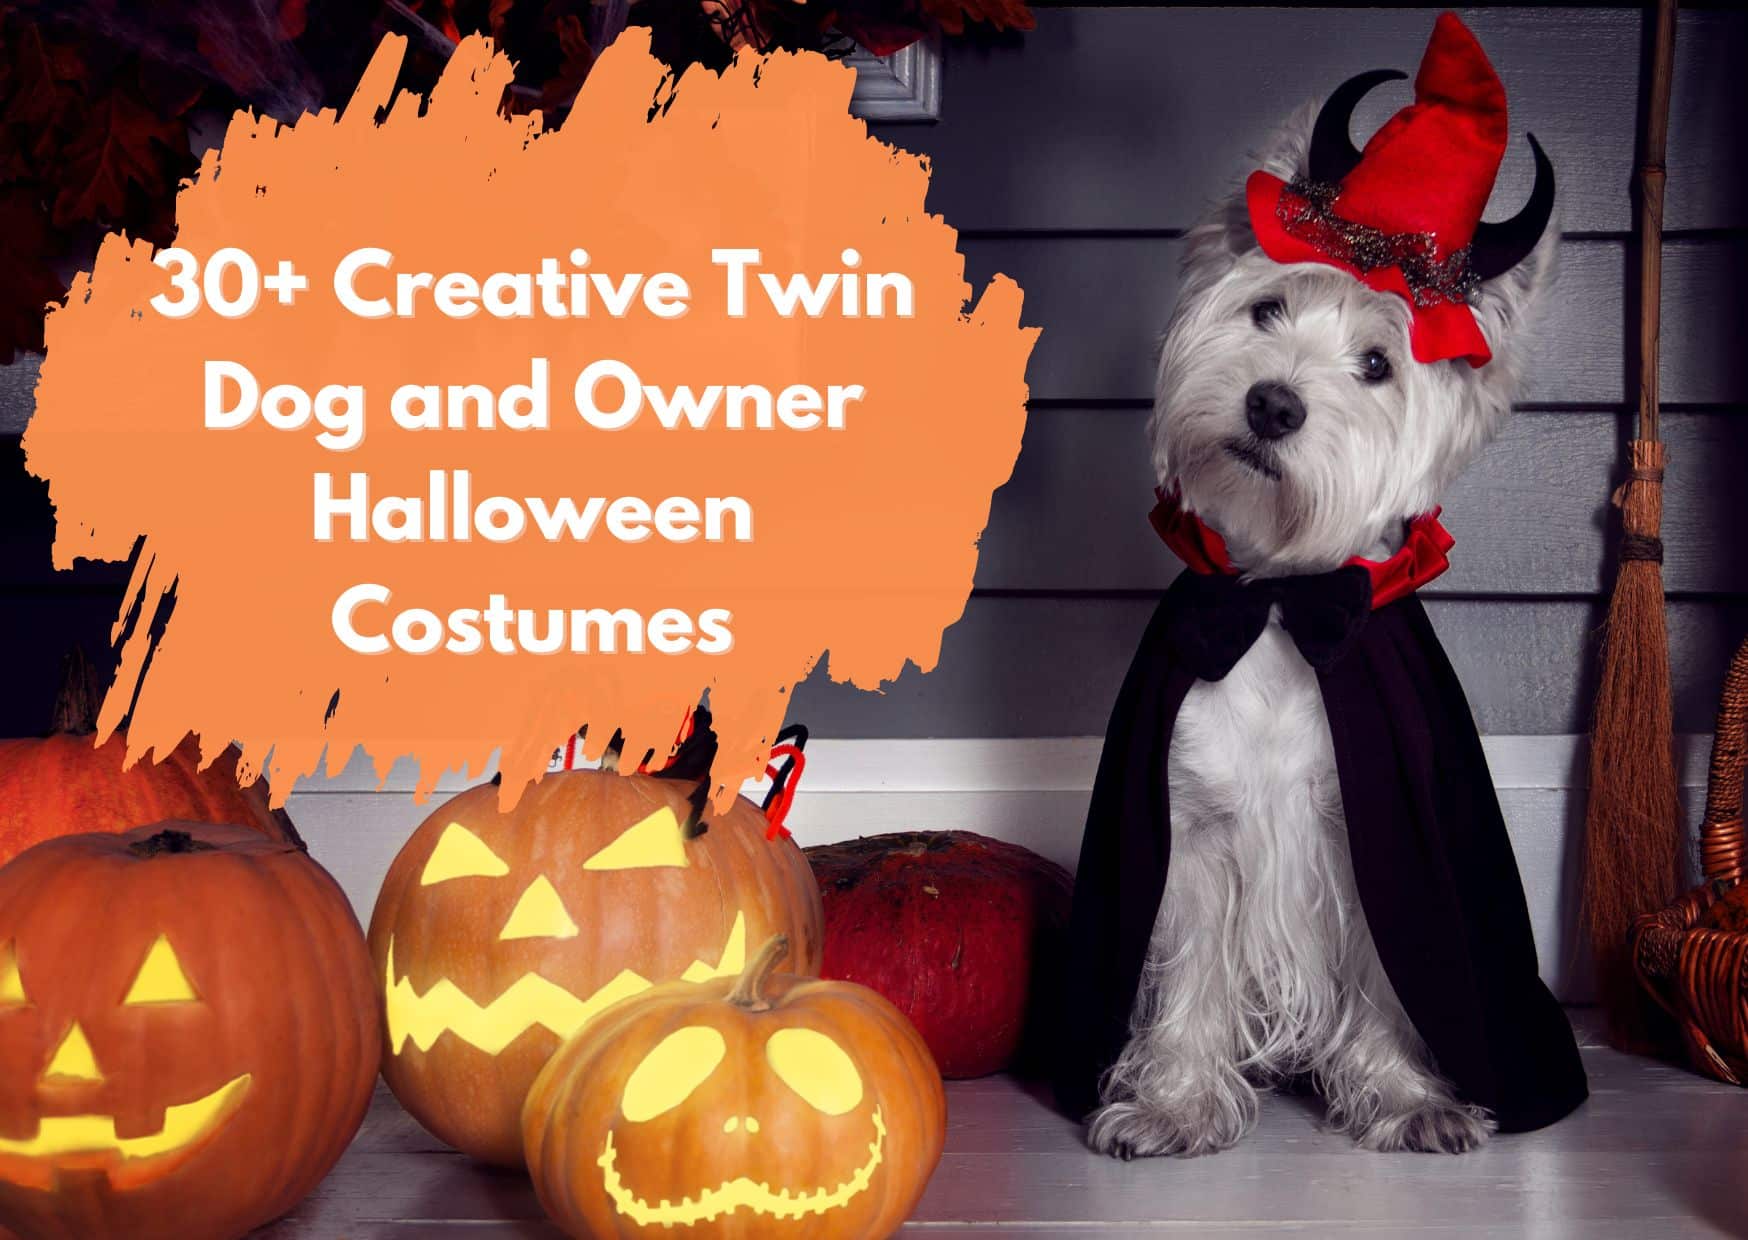 Creative Twin Dog and Owner Halloween Costumes